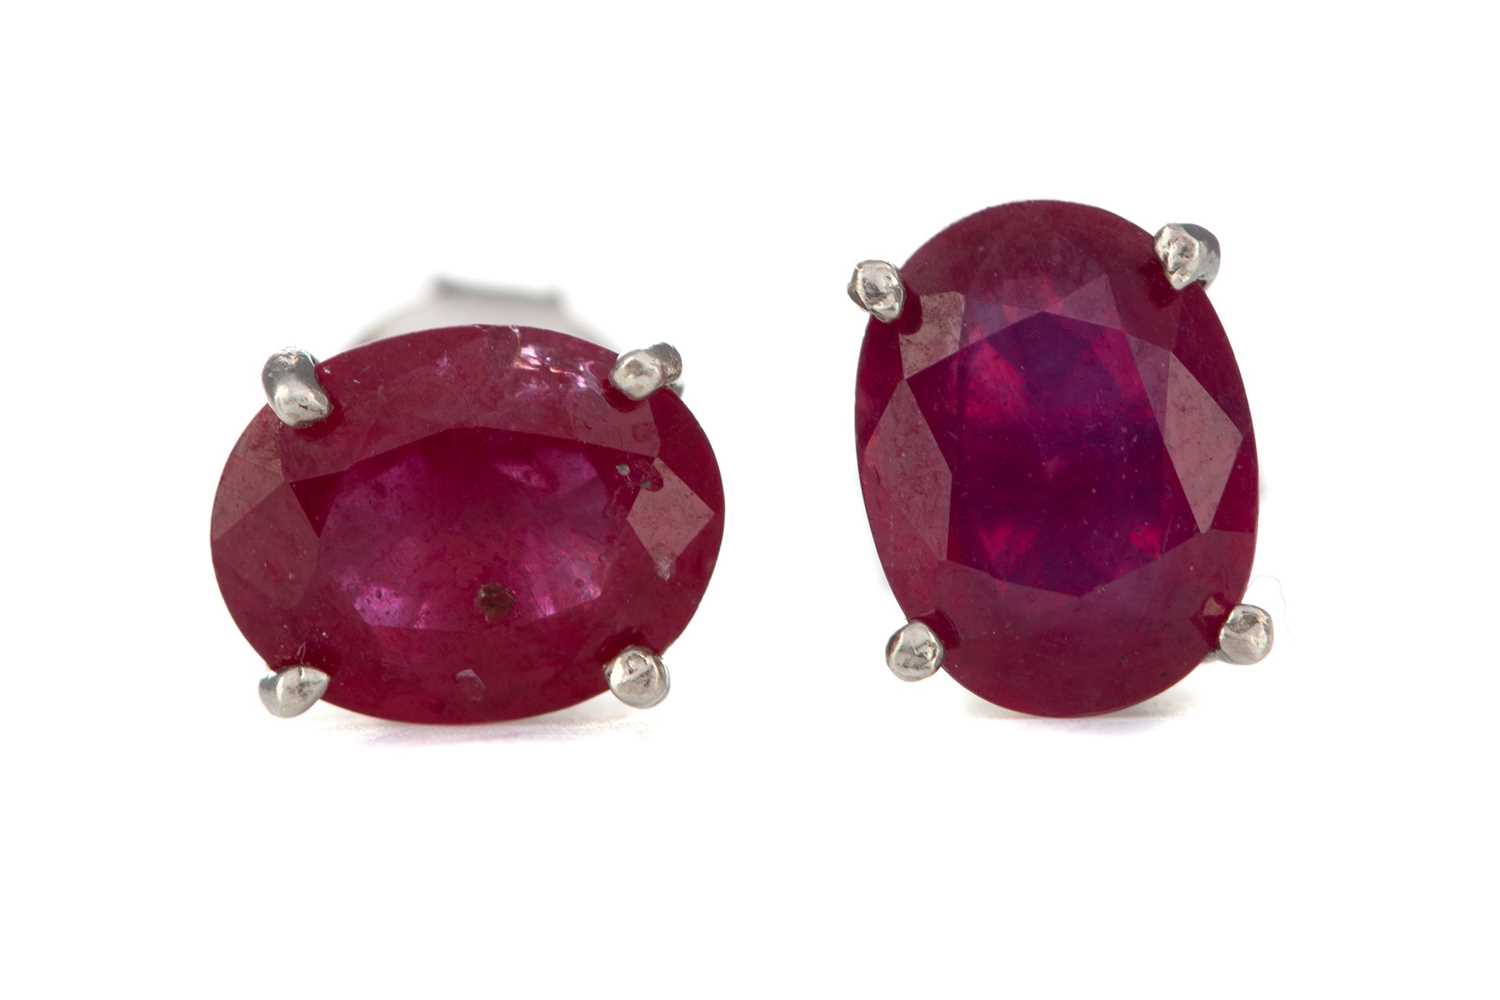 Lot 390 - A PAIR OF TREATED RUBY EARRINGS